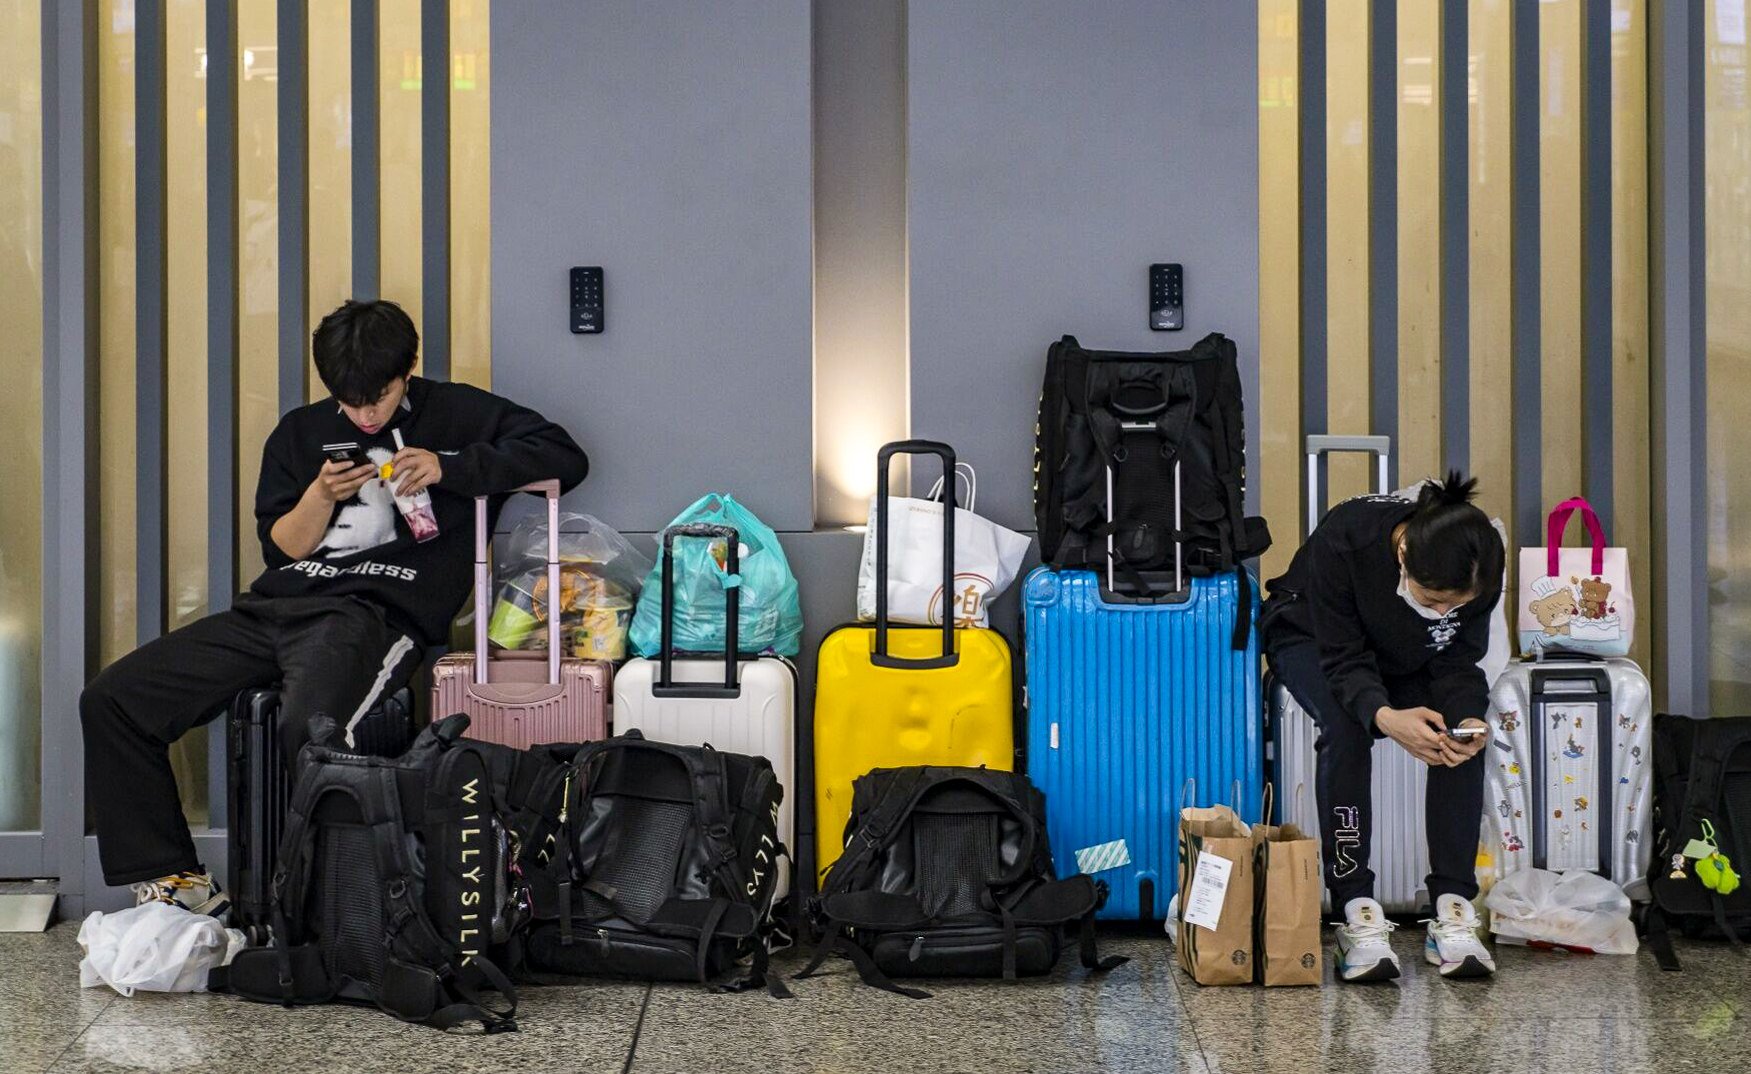 On April 30, travellers wait at Hongqiao High-speed Railway Station ahead of May Day holidays in Shanghai. Some universities in China are accused of imposing unnecessary rules on adult students travelling in the break. Photo: Bloomberg